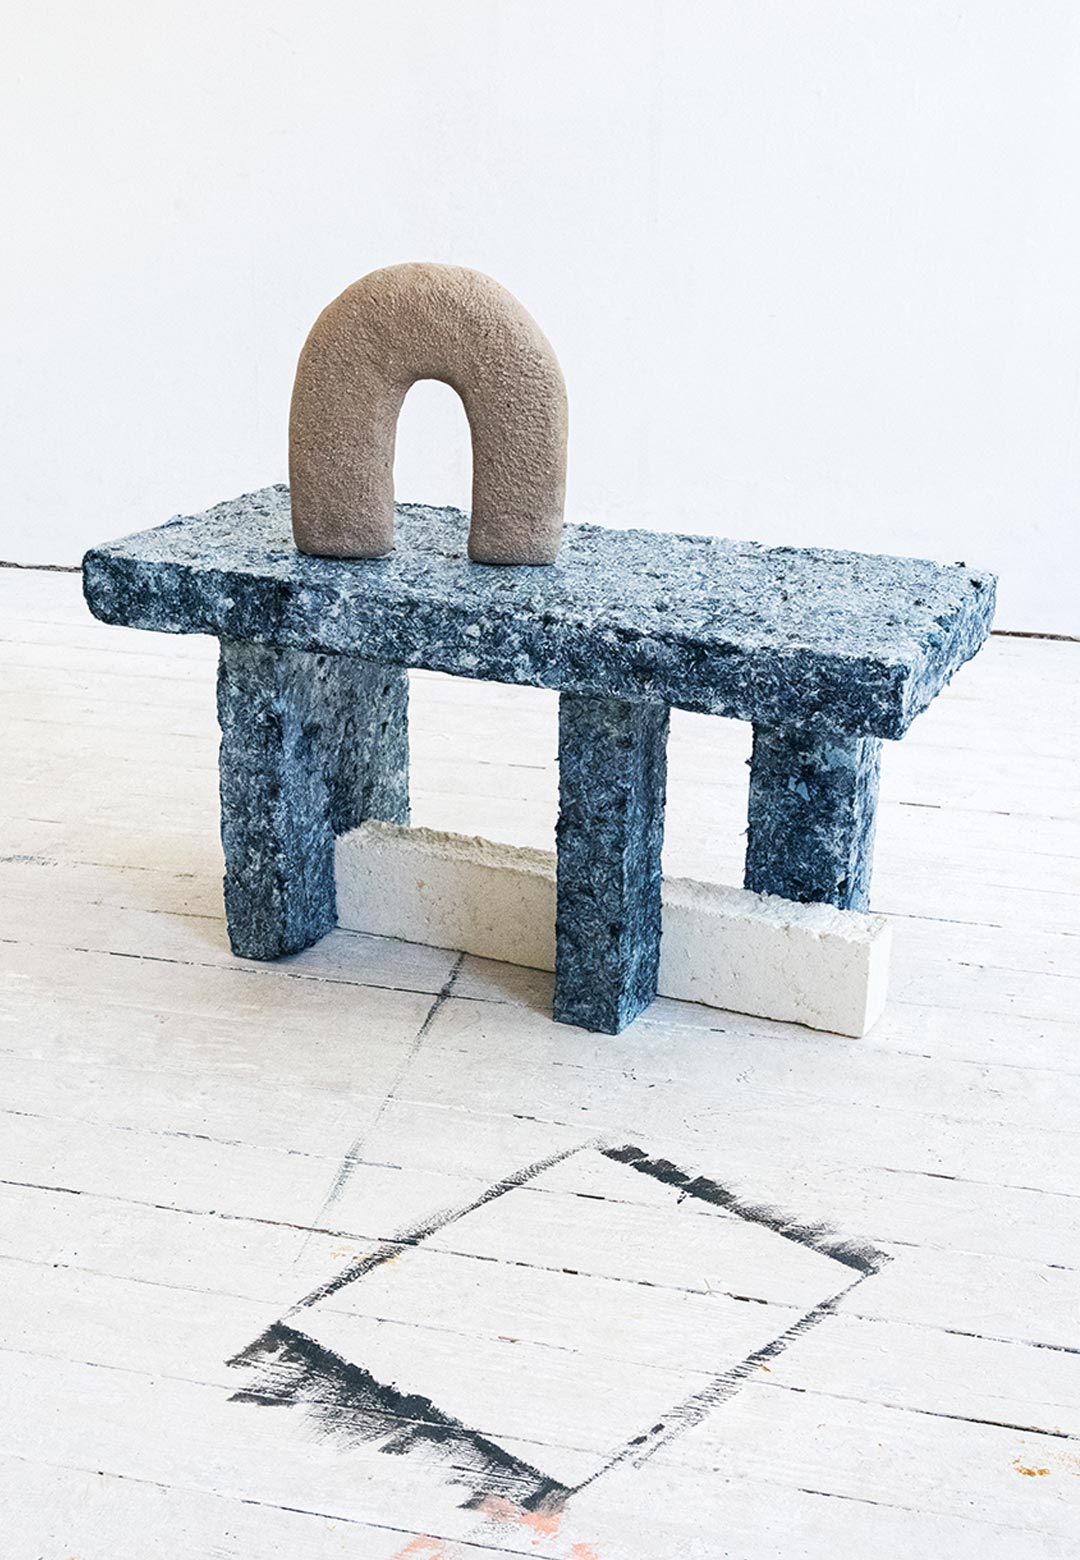 Salvaged denim reimagined as the raw material for functional furniture